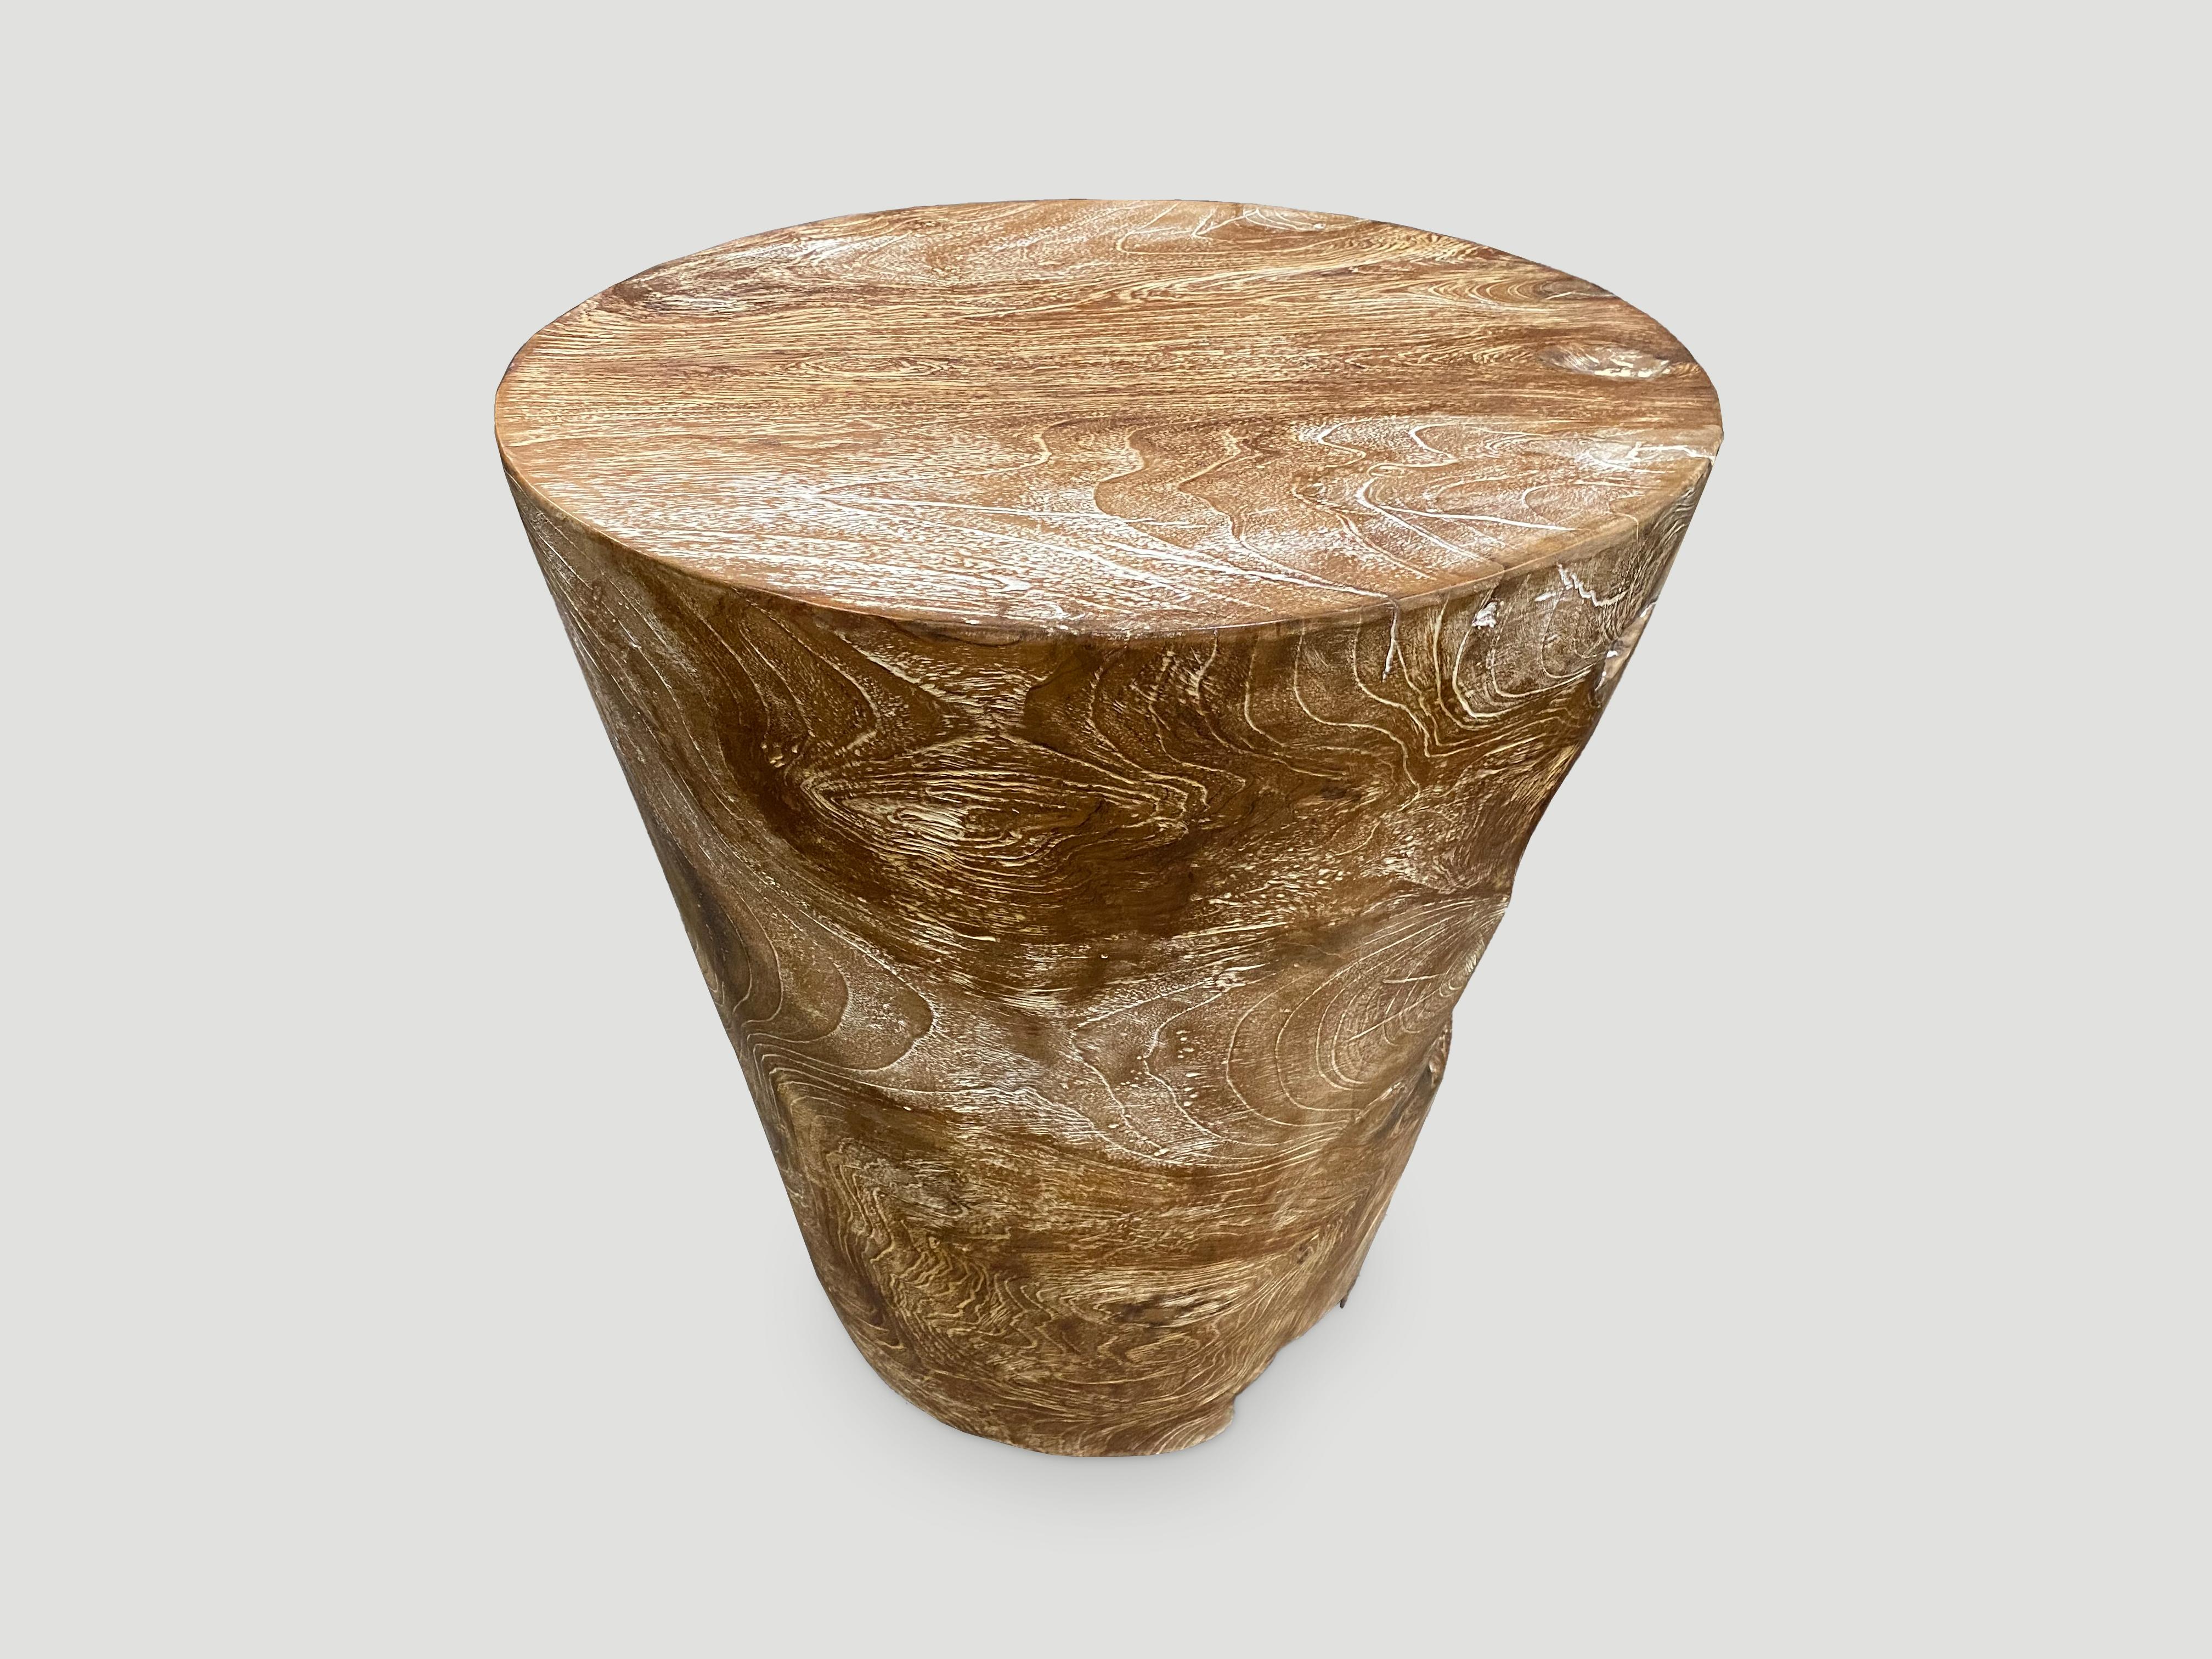 Beautiful natural teak side table hand carved from a single reclaimed teak root with a graduation from the bottom at 12” diameter to 18” at the top.  We added a light ceruse. A perfect combination of modern and organic.

Own an Andrianna Shamaris